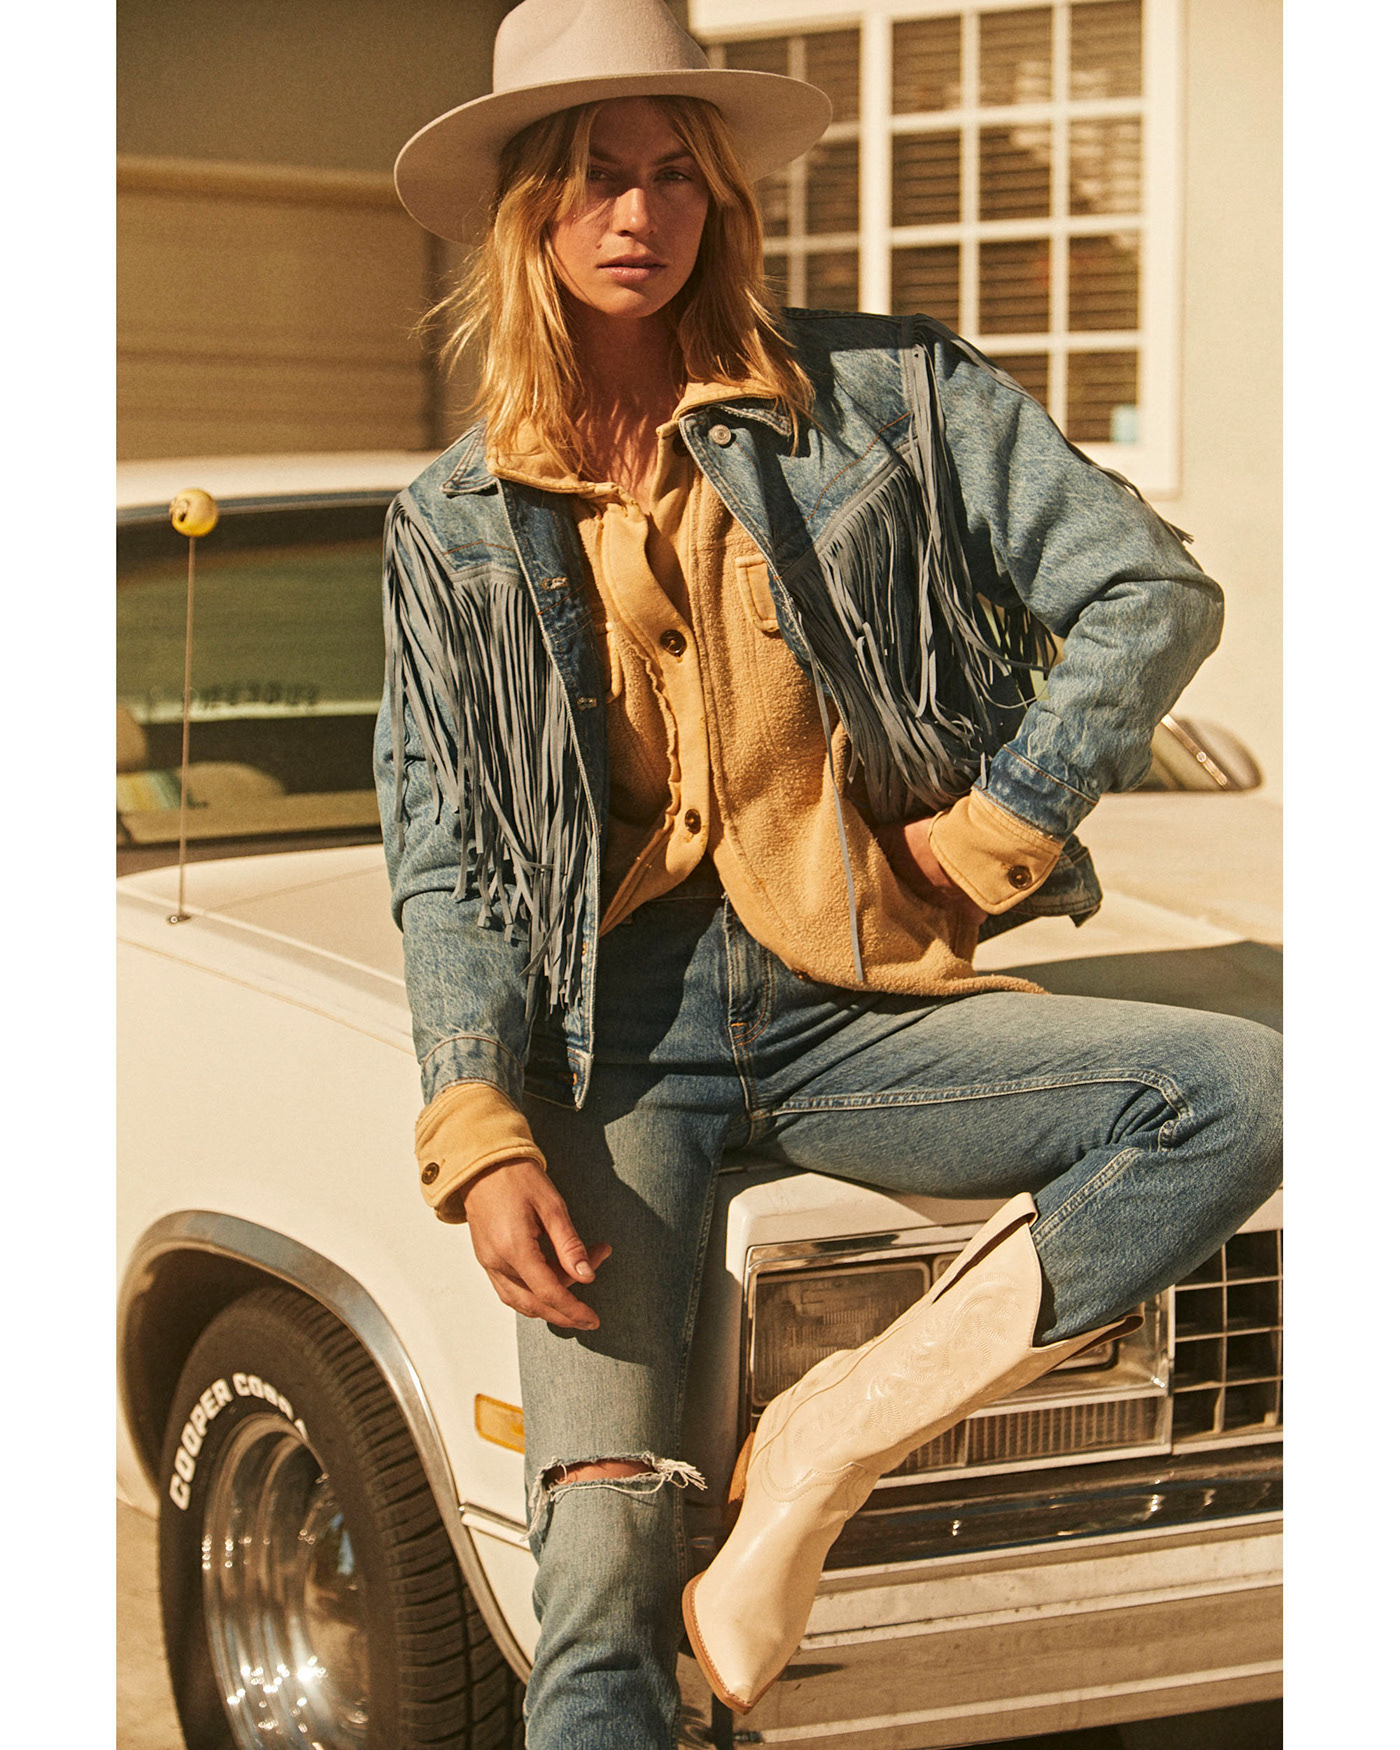 Free People Collection | HOT ZONE Spring 2021 on Behance